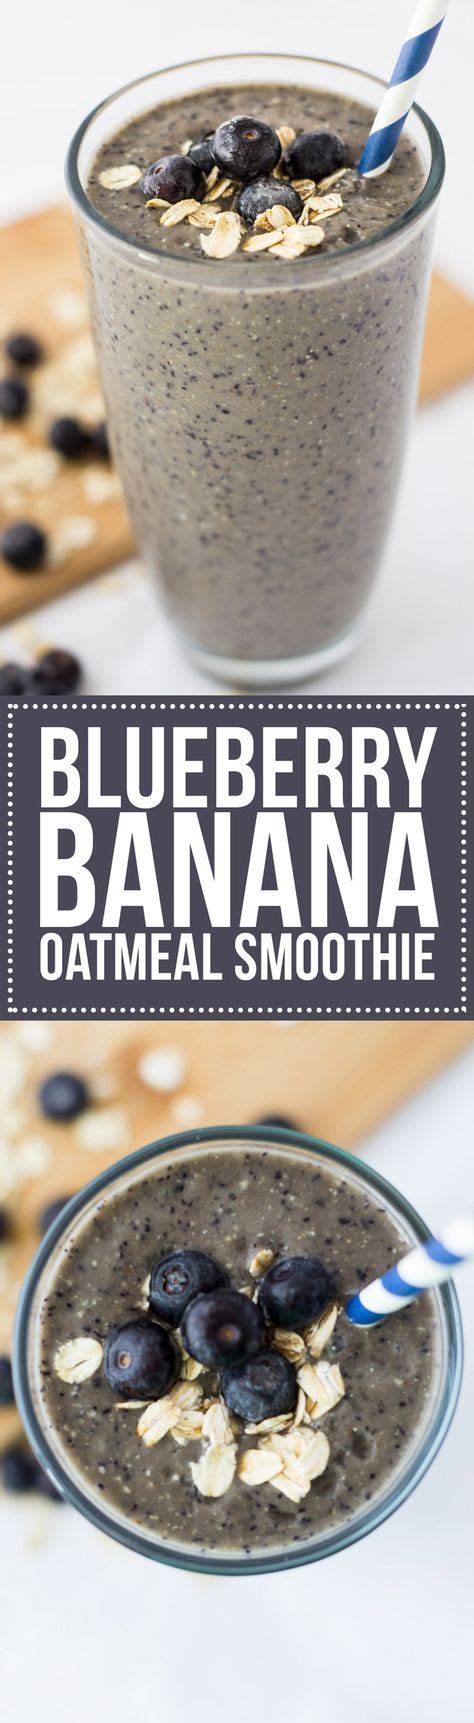 blueberry banana oatmeal smoothie for a nutritious breakfast on the go breakfast smoothie